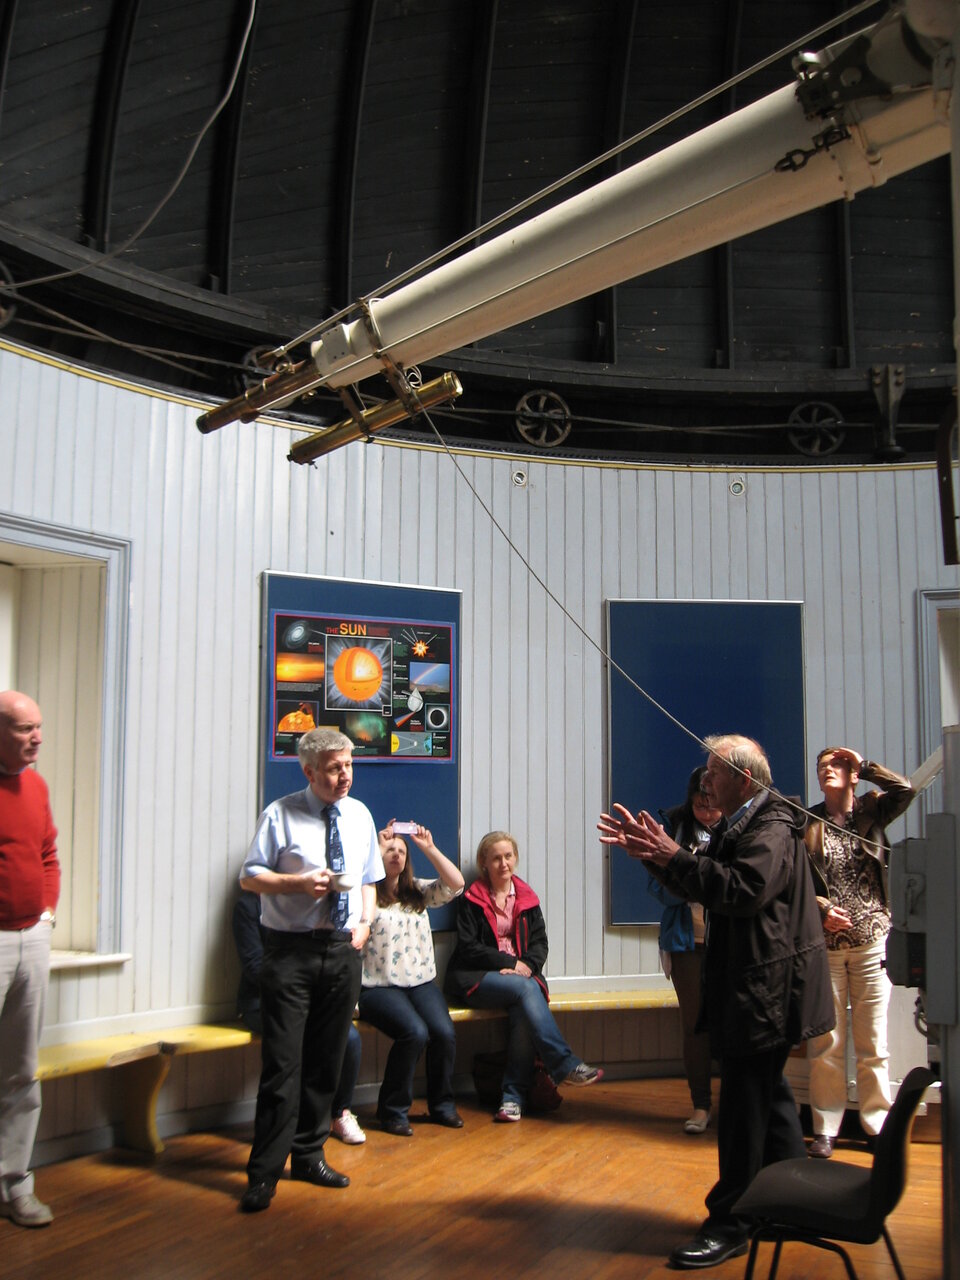 Teachers participating in an astronomy lecture